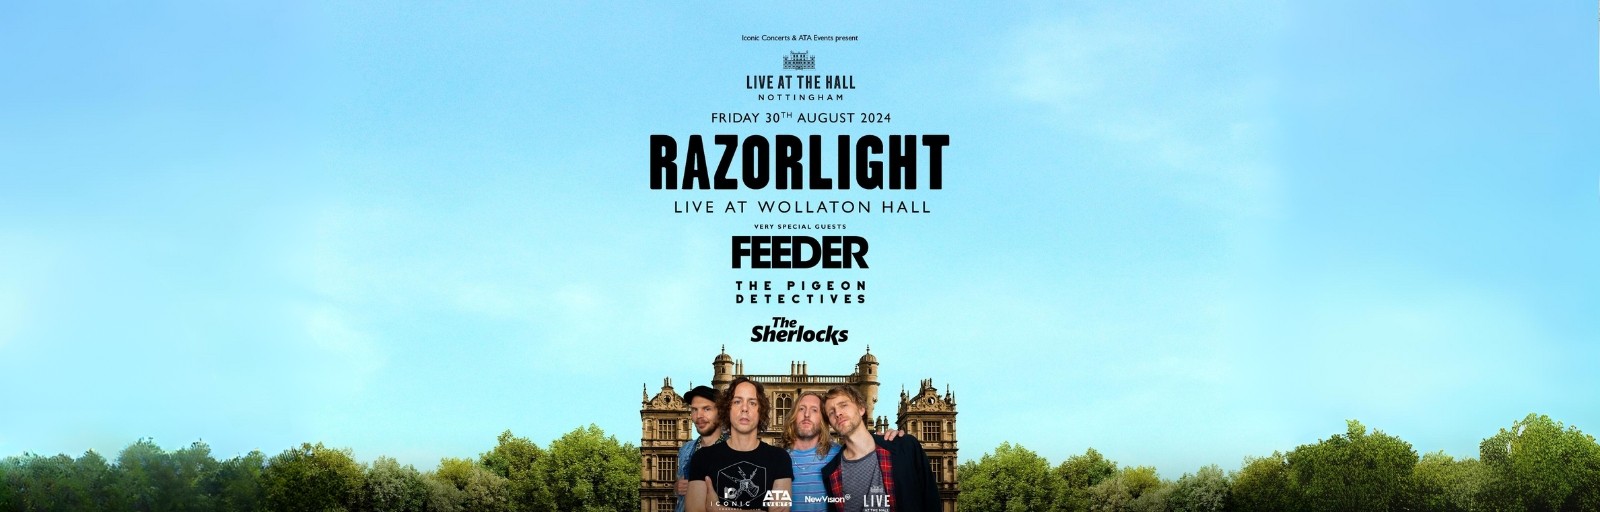 Live at The Hall featuring Razorlight